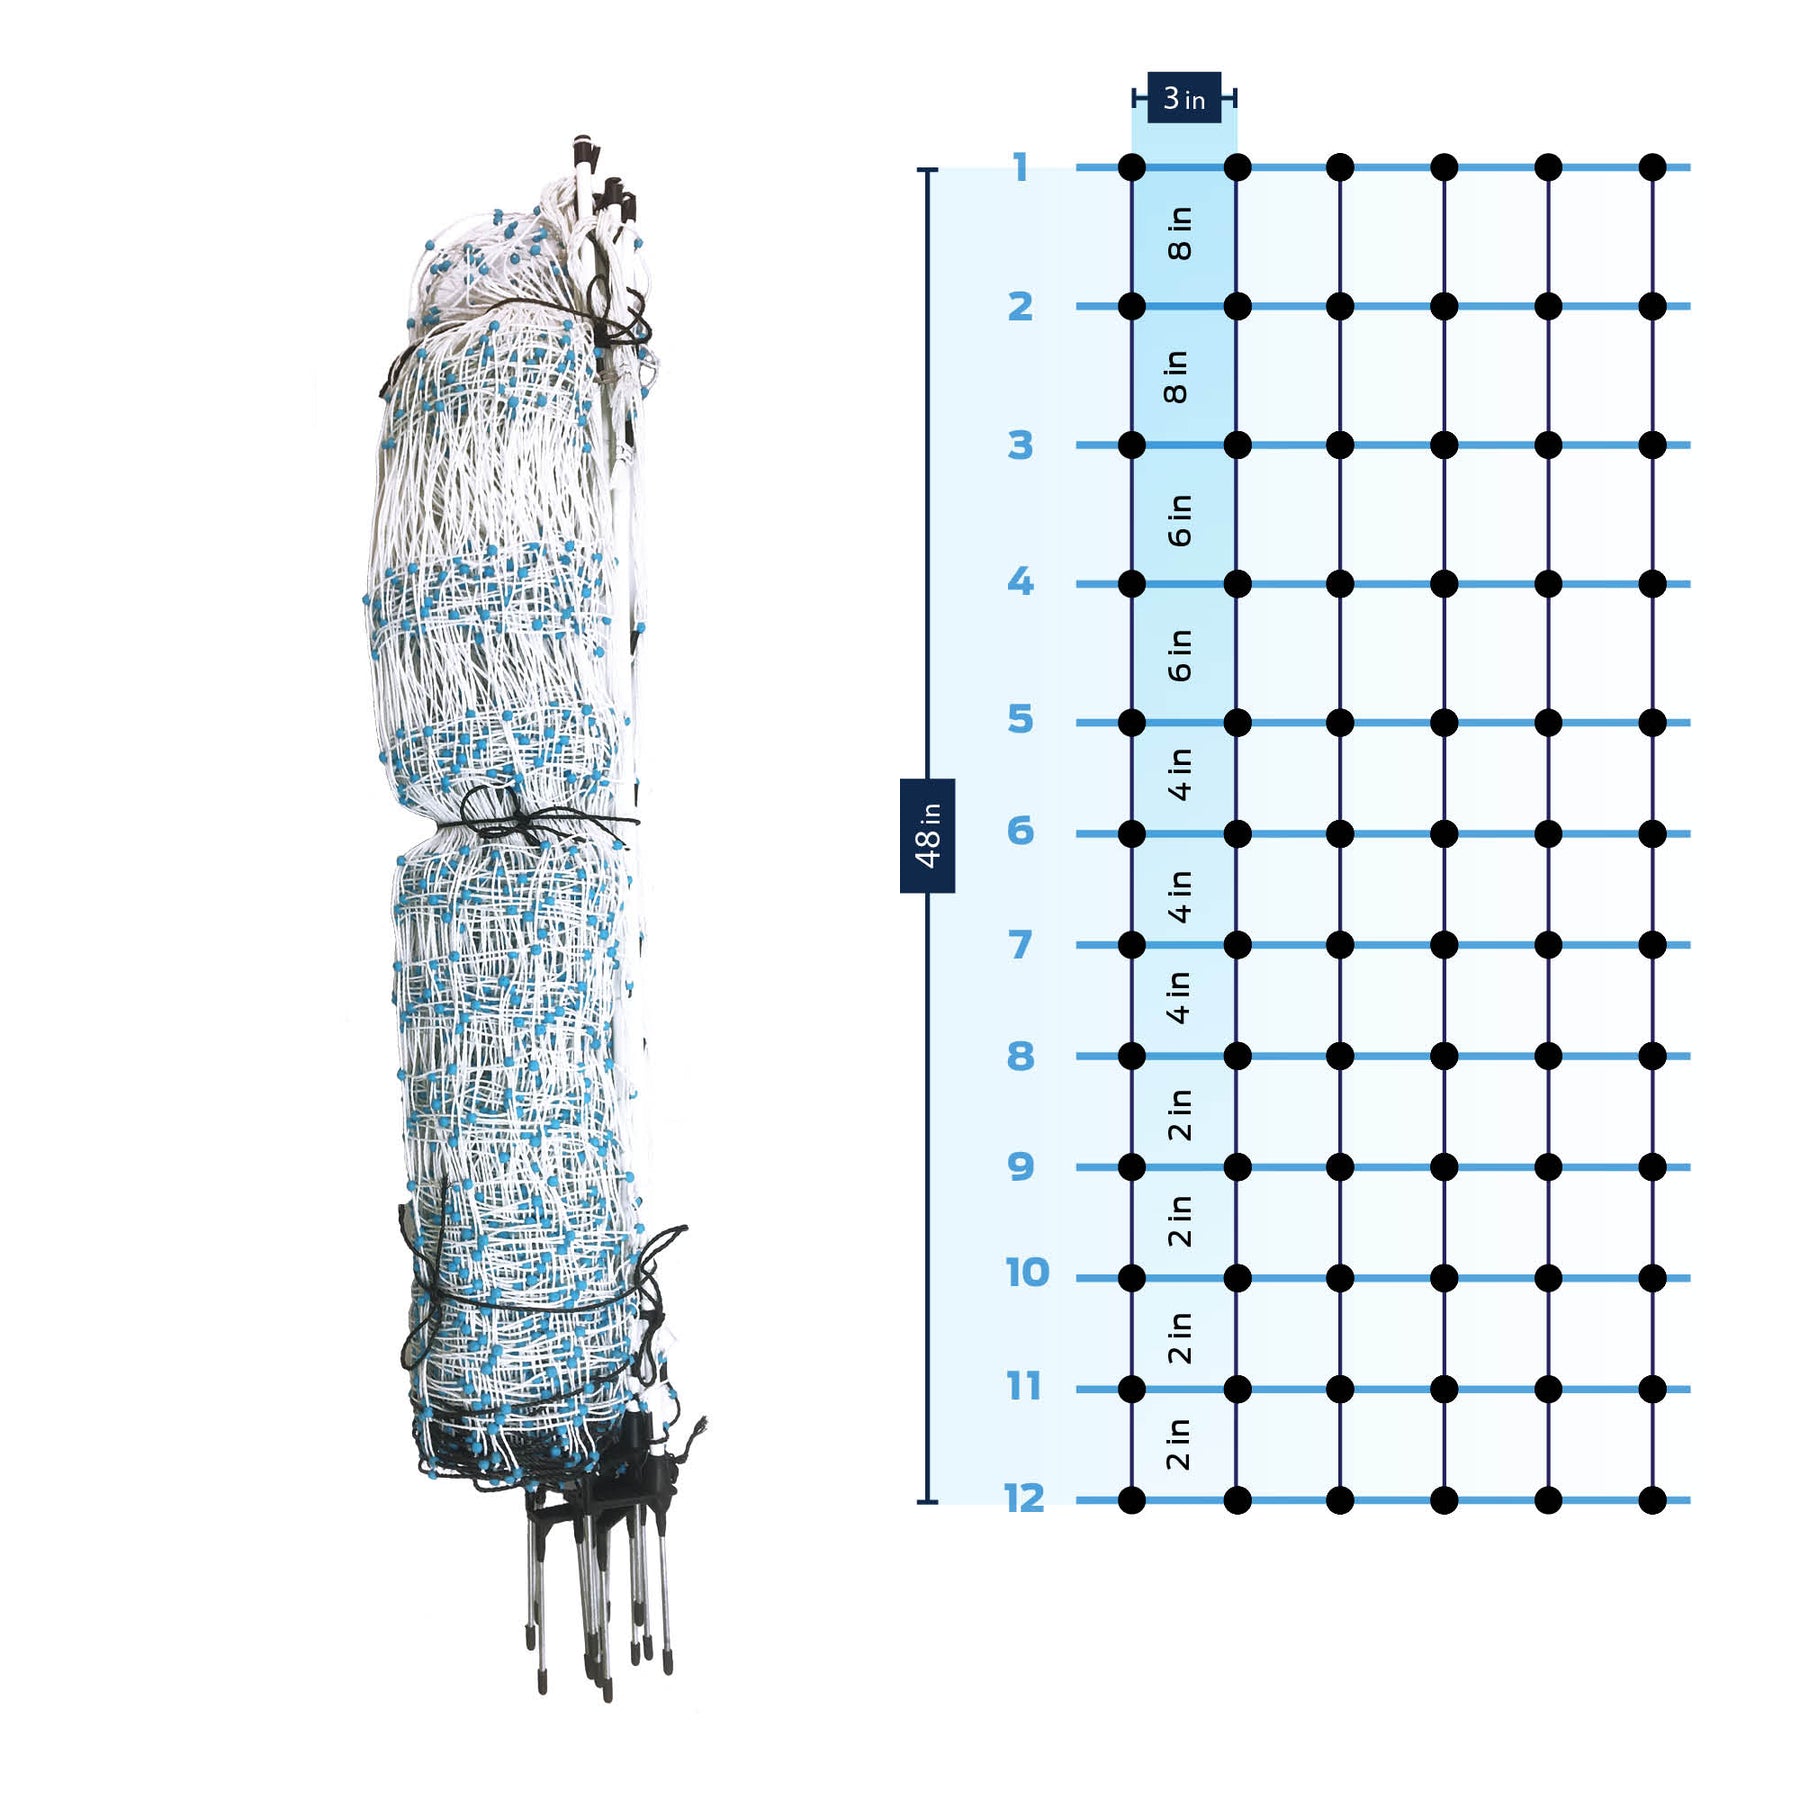  Starkline 42 x 164' Electric Poultry Netting, Double Spiked  Fiberglass Posts